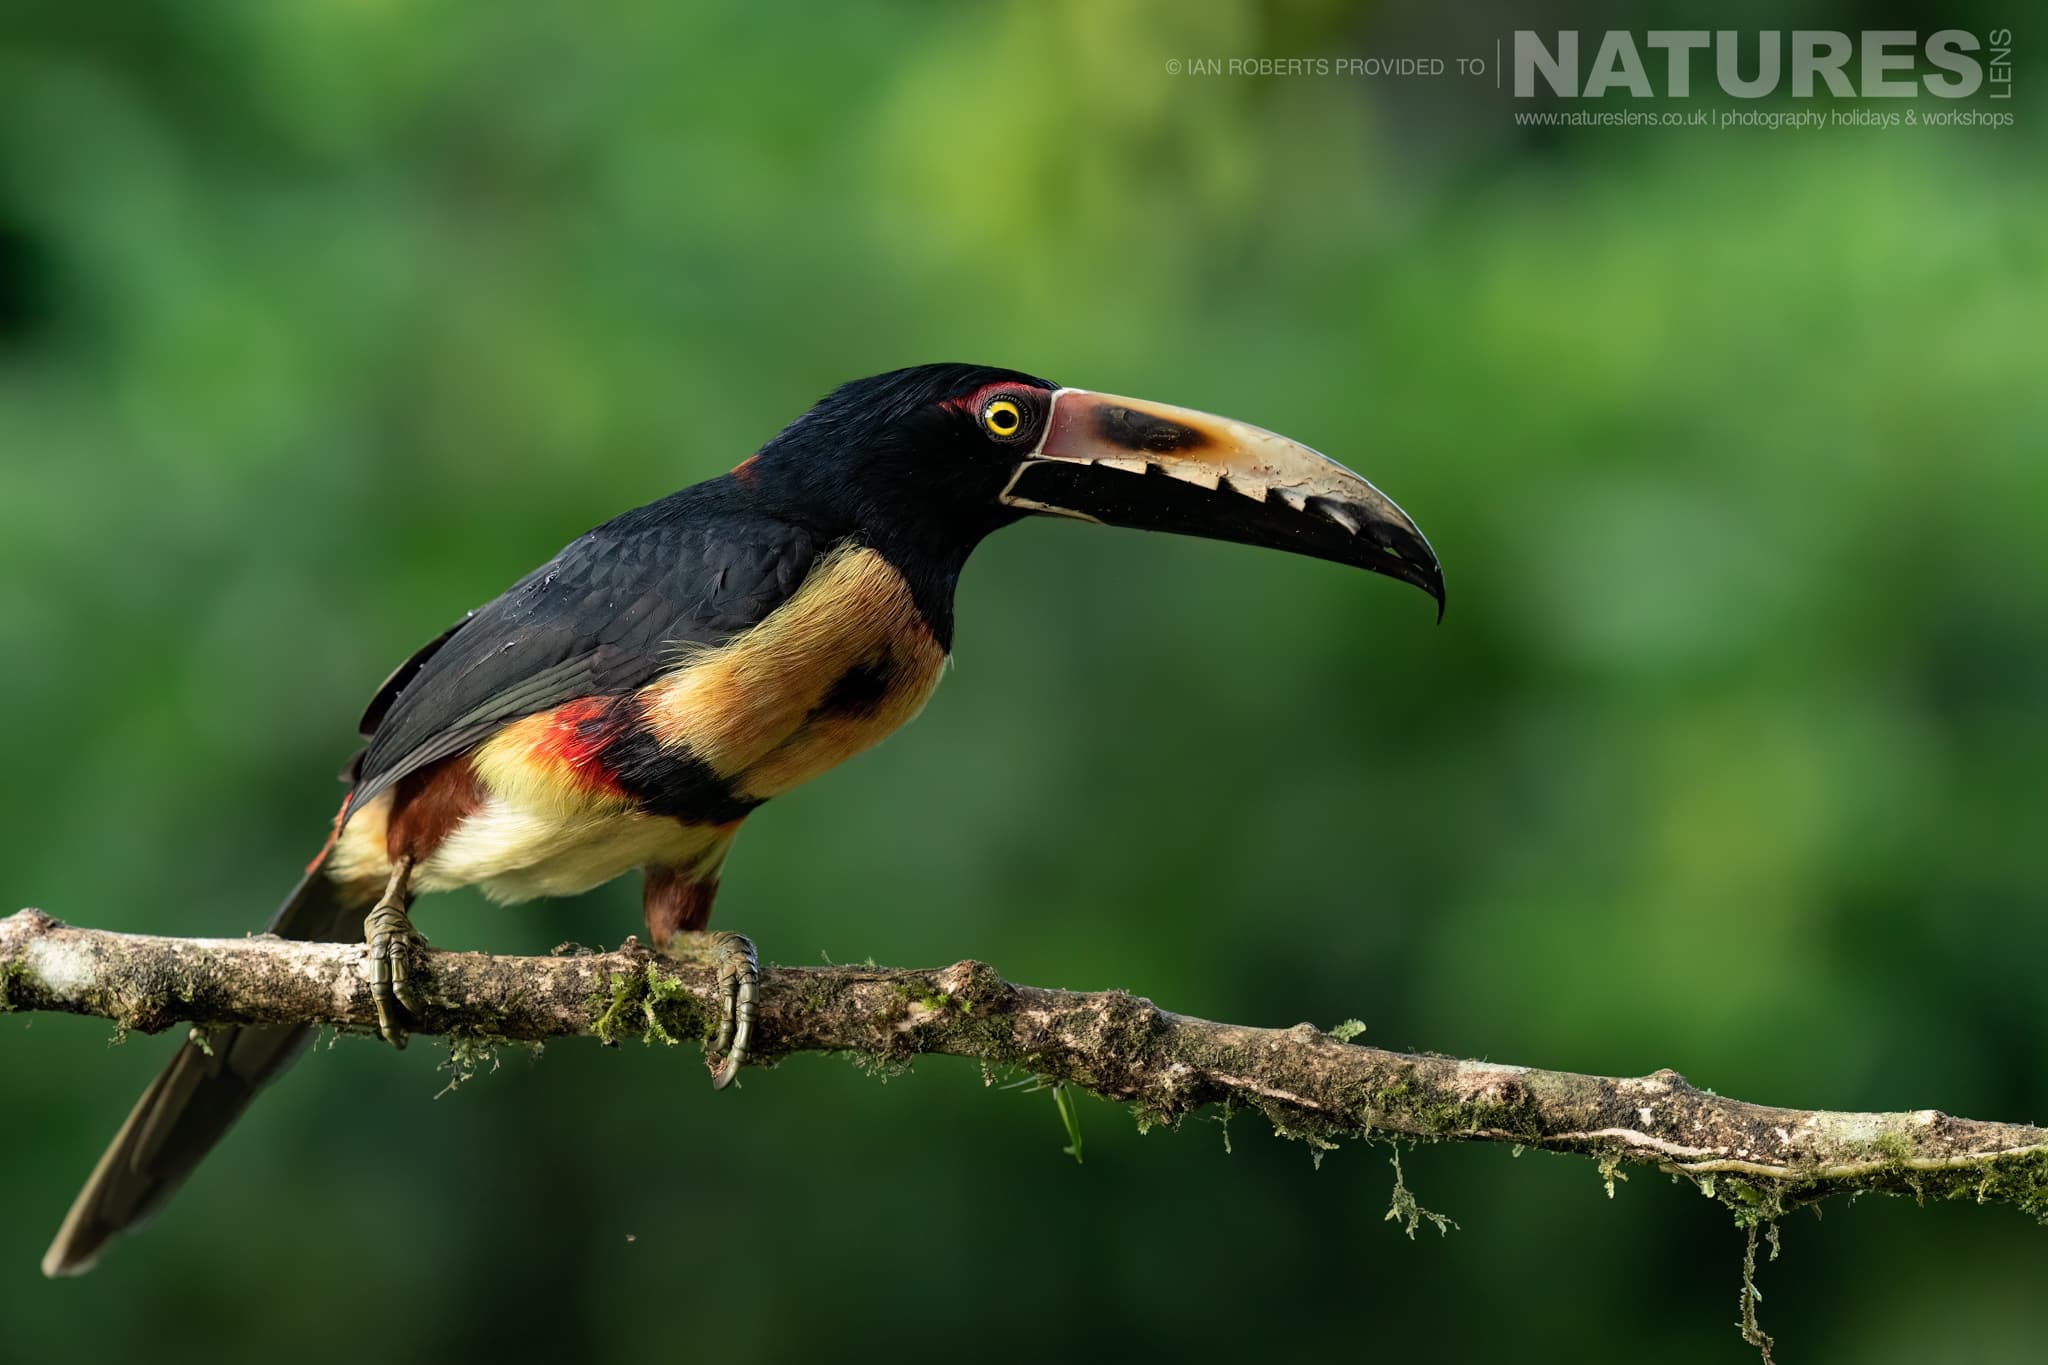 A Collared Aracari One Of The Toucans Found In Costa Rica'S Rainforests